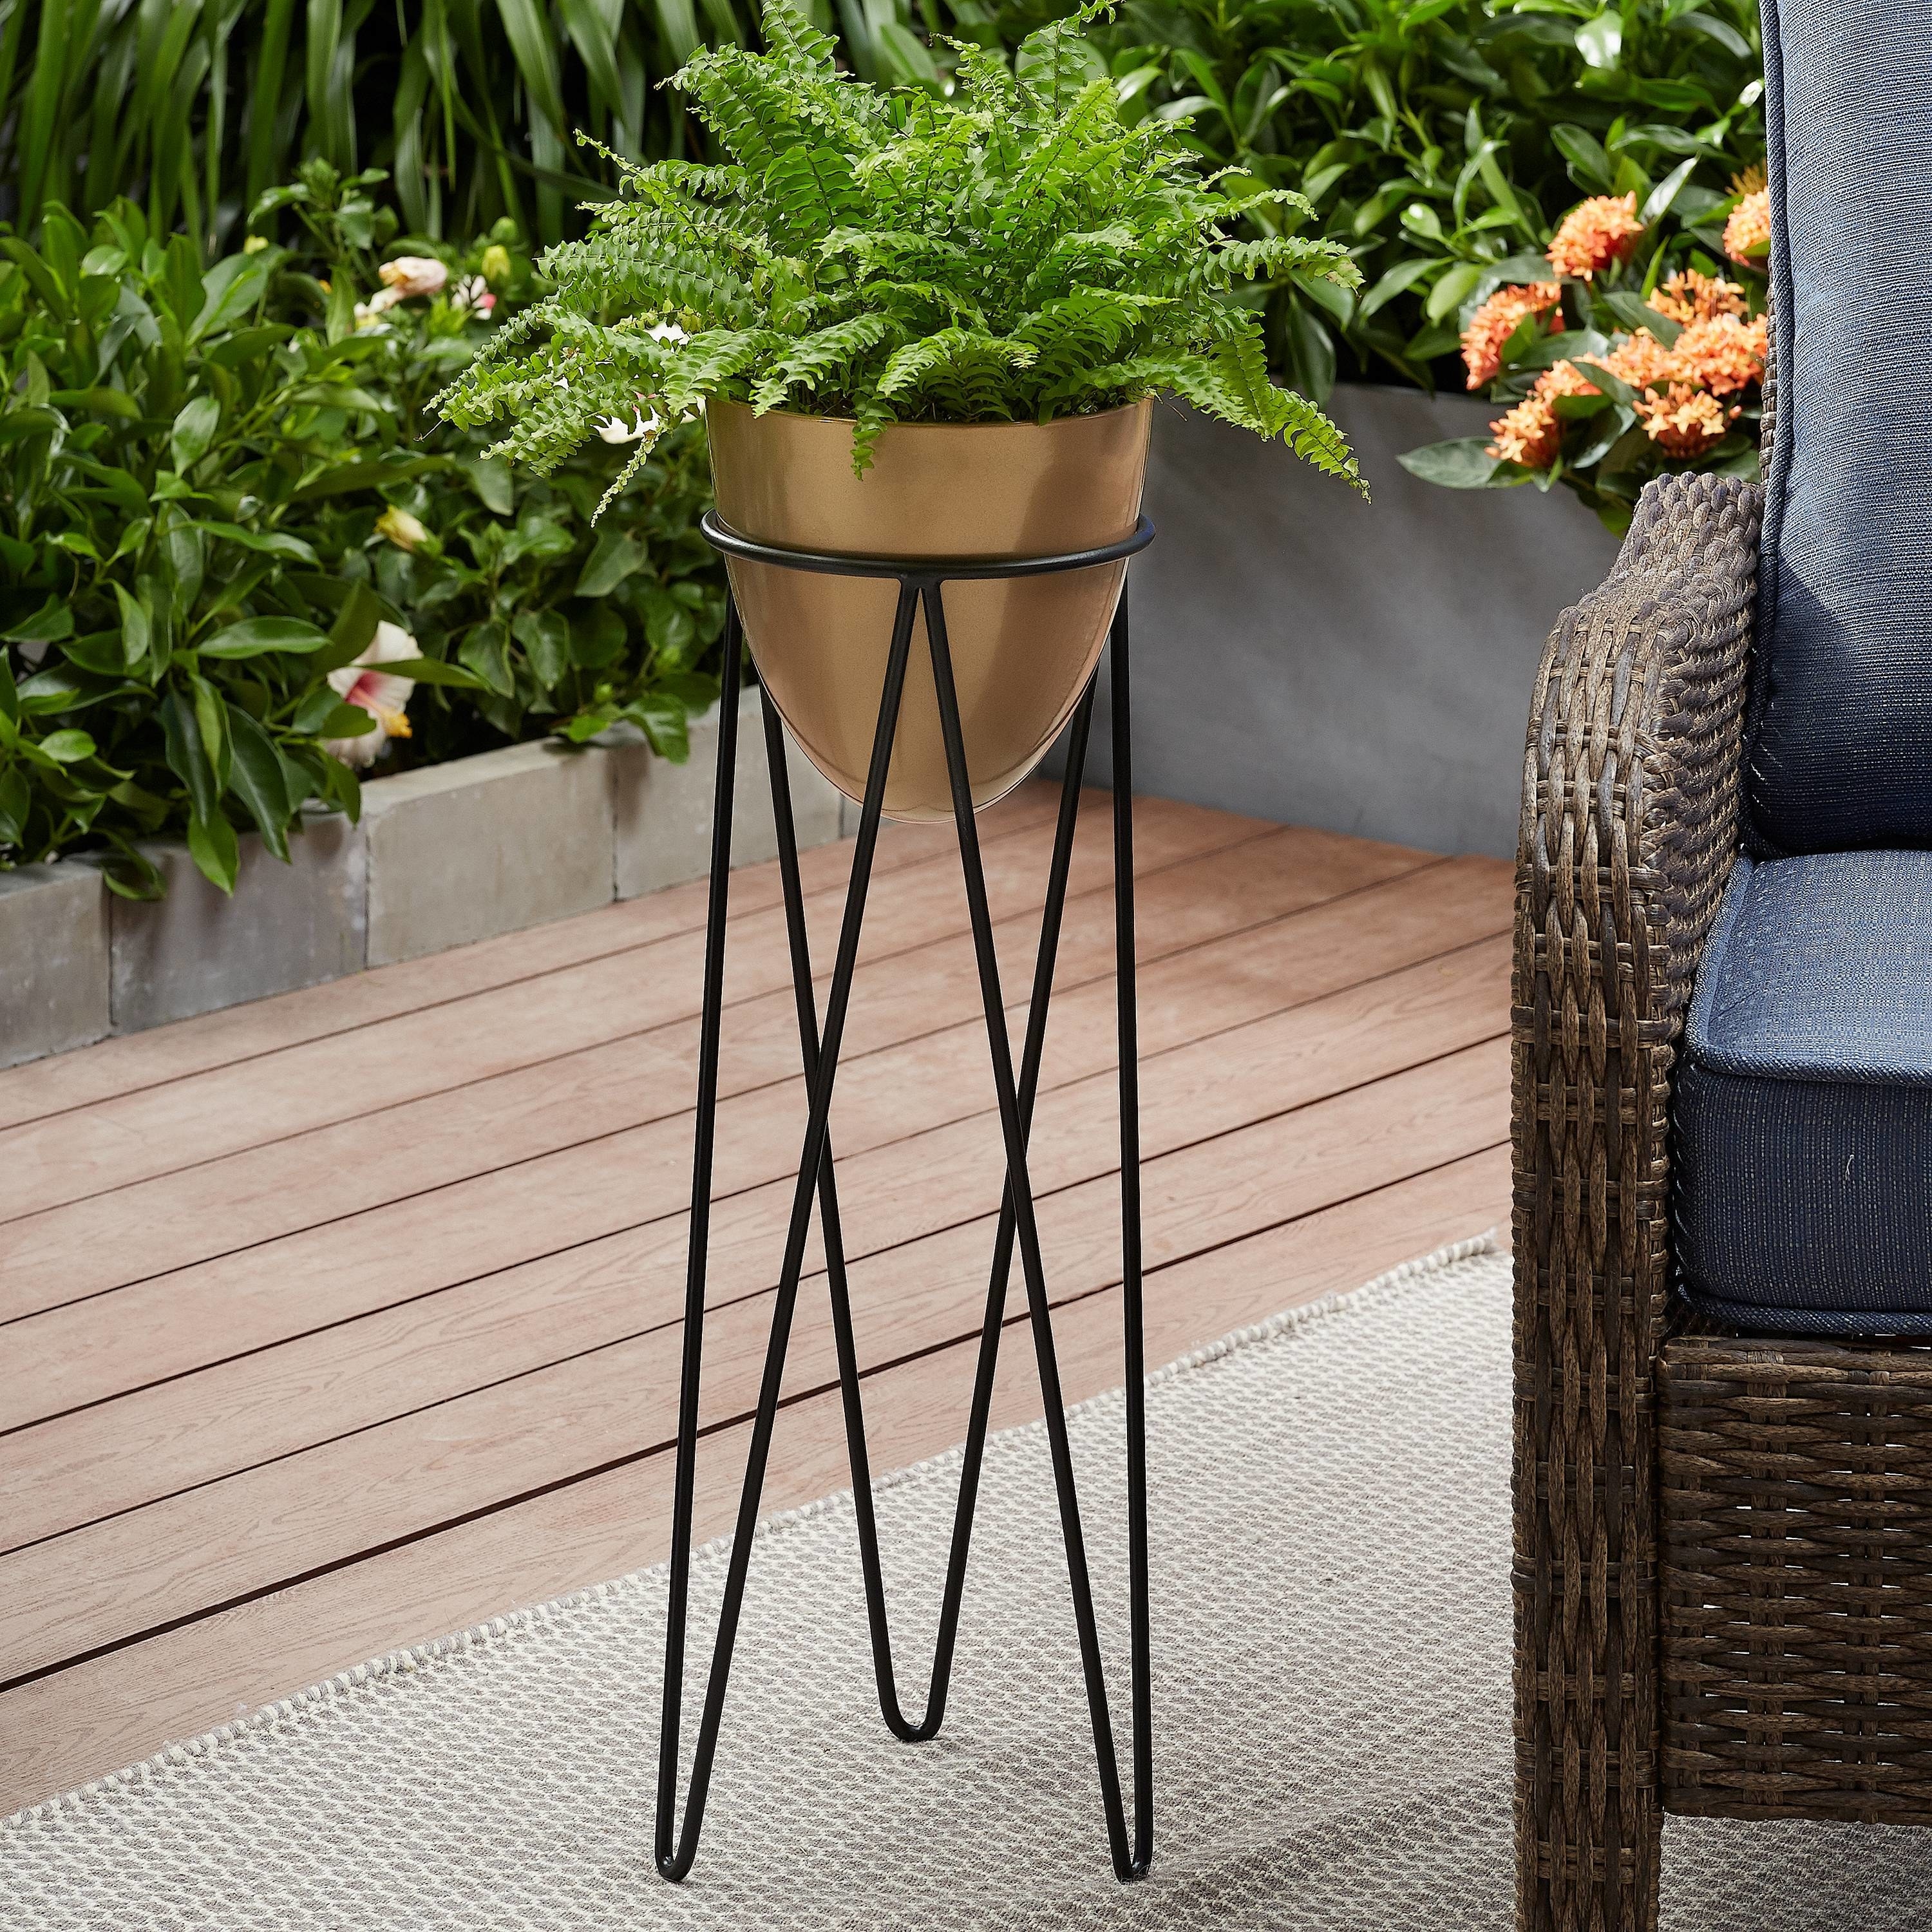 A brass-colored, bullet-shaped planter nestled in a black boho-style plant stand with hairpin legs